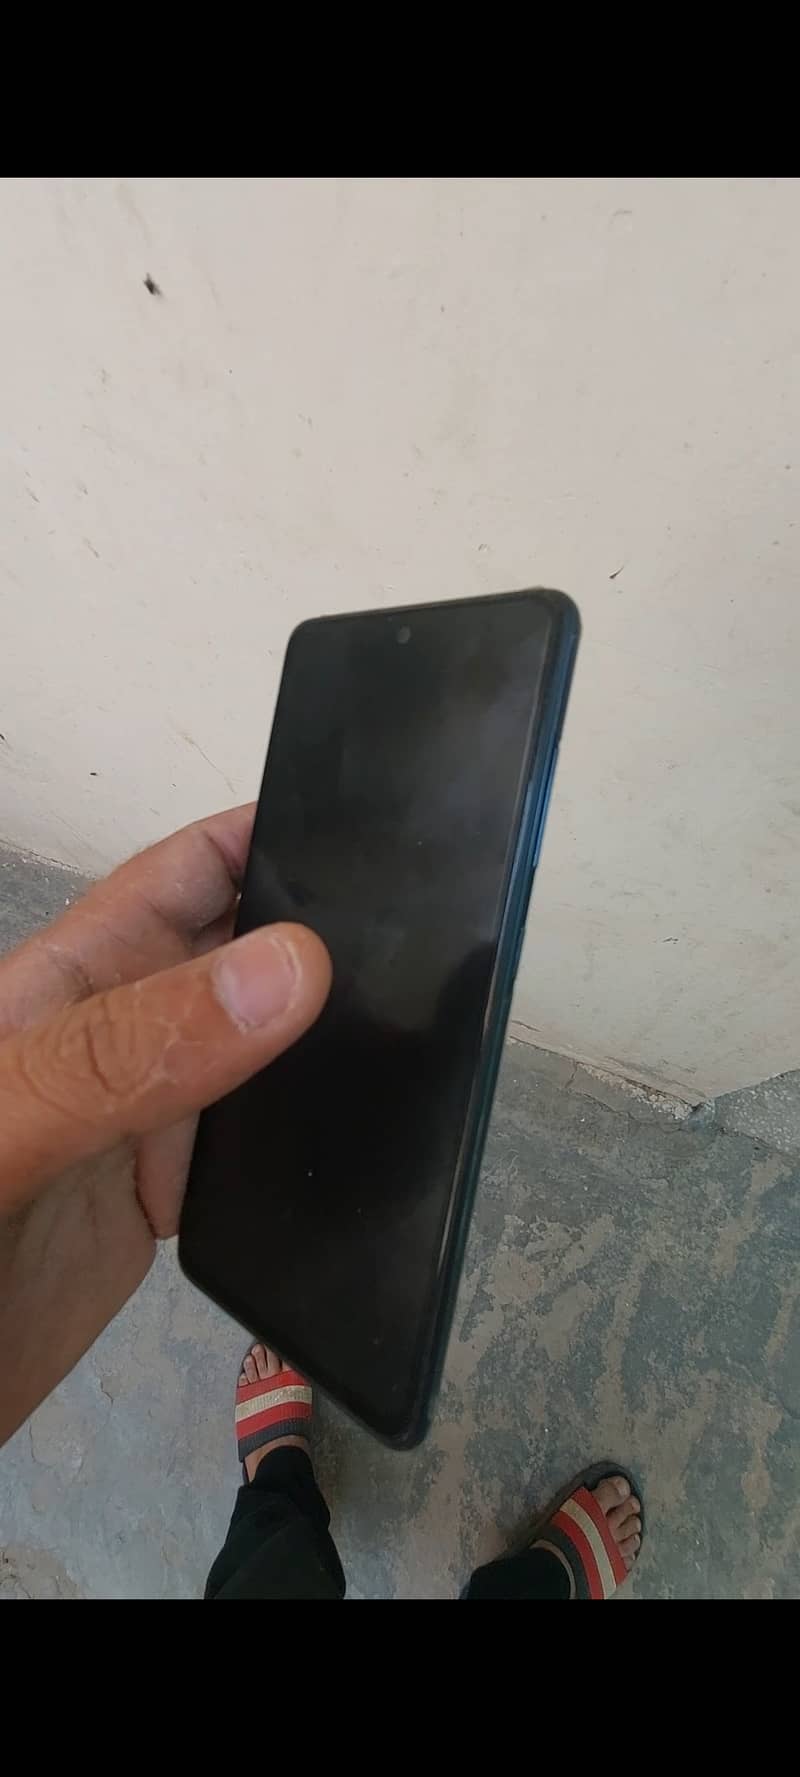 Samsung A51 10/10 Up for sale 1